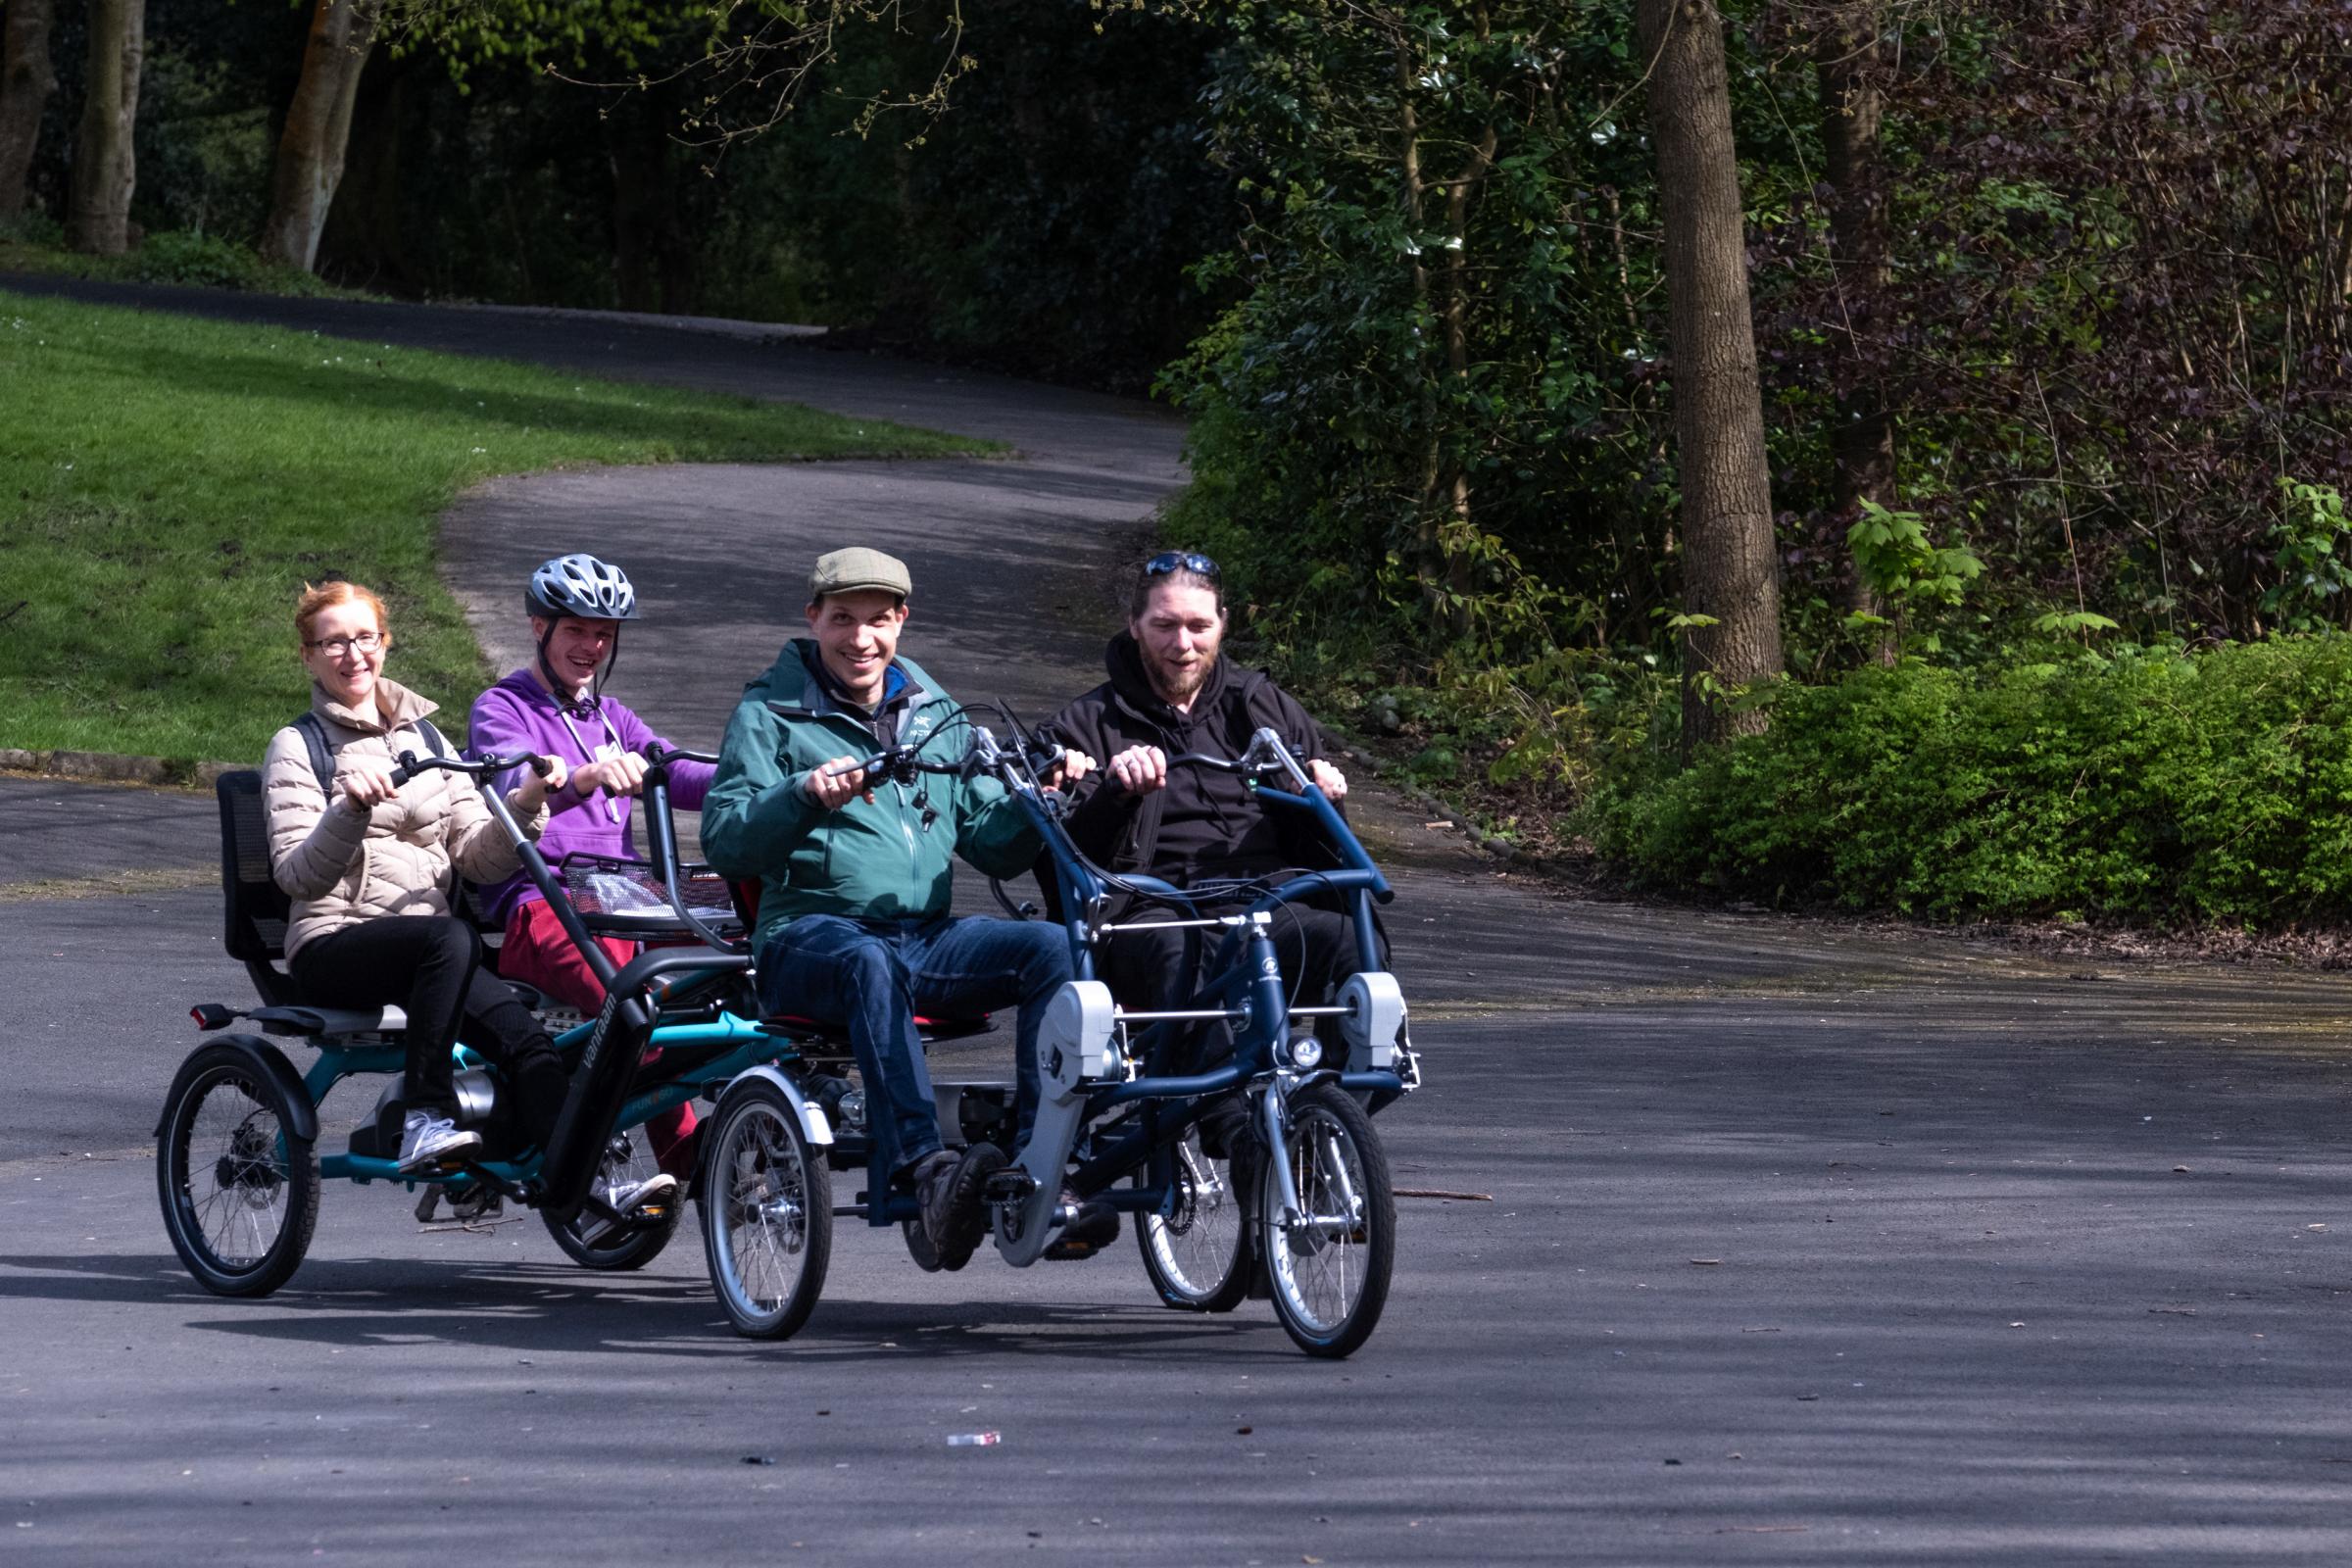 Some participants try out the adapted cycles in Hyde Park, Tameside, as the Cycling UK scheme launches. (Picture: Mark Harvey/Cycling UK)